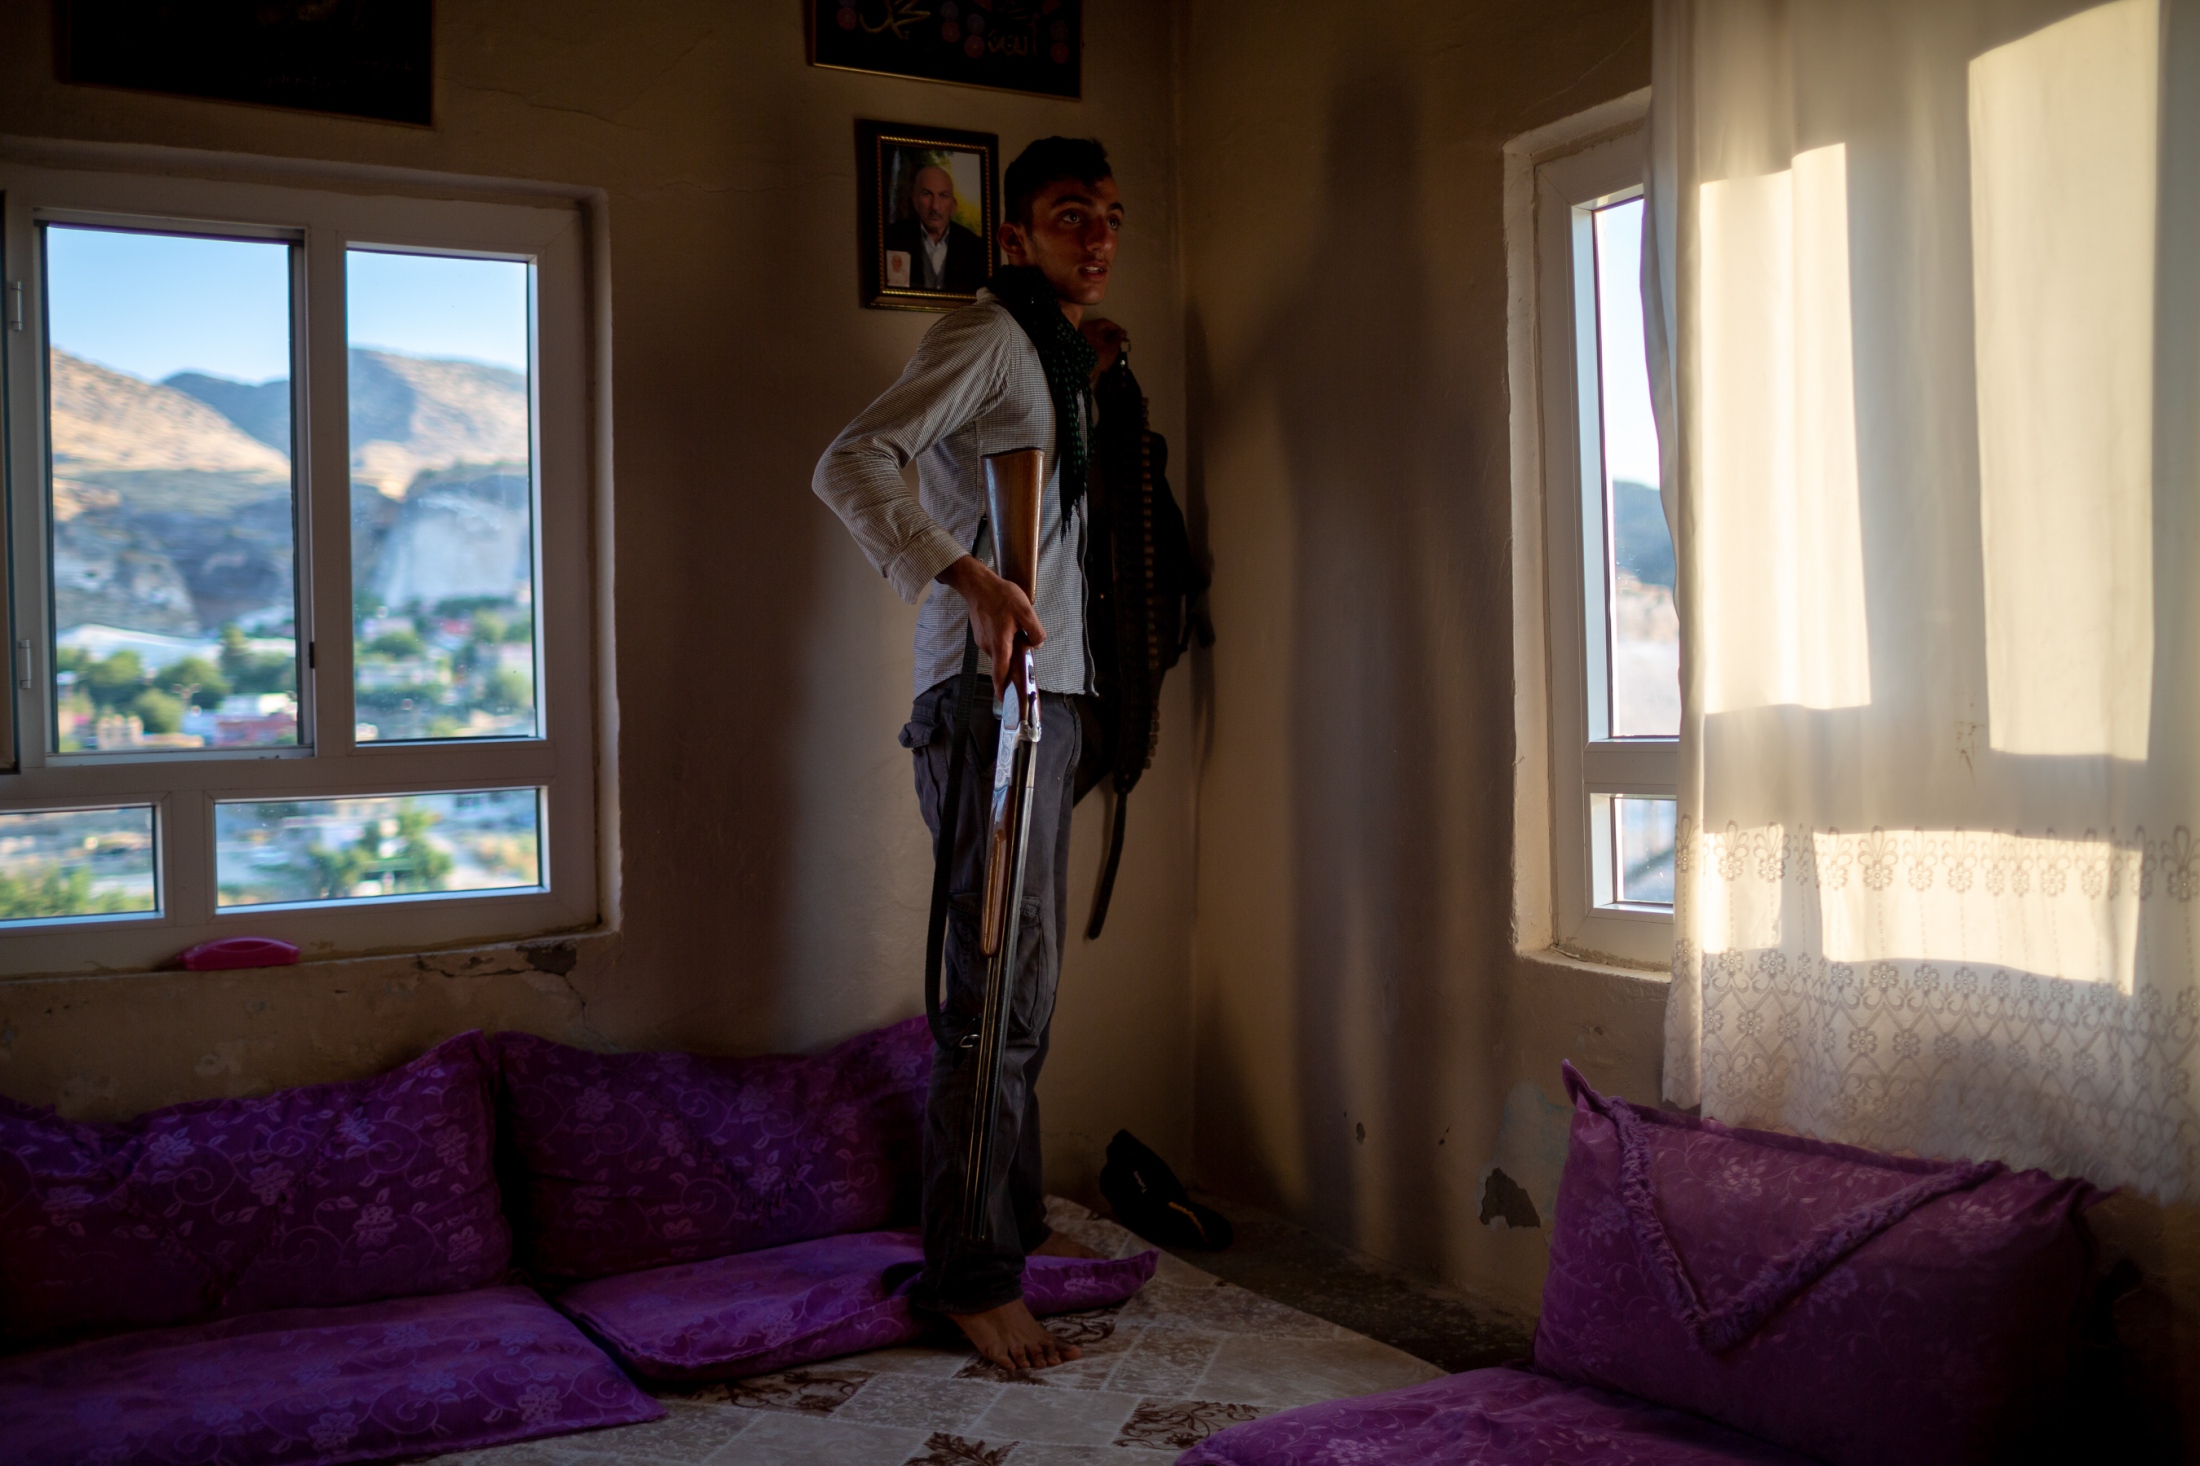 A resident of a village adjacent to Hasankeyf shows off his hunting gun. While the village across the Tigris river from Hasankeyf will not be submerged, the residents believe they will have to move because the settling ground will destabilize the surrounding structures,